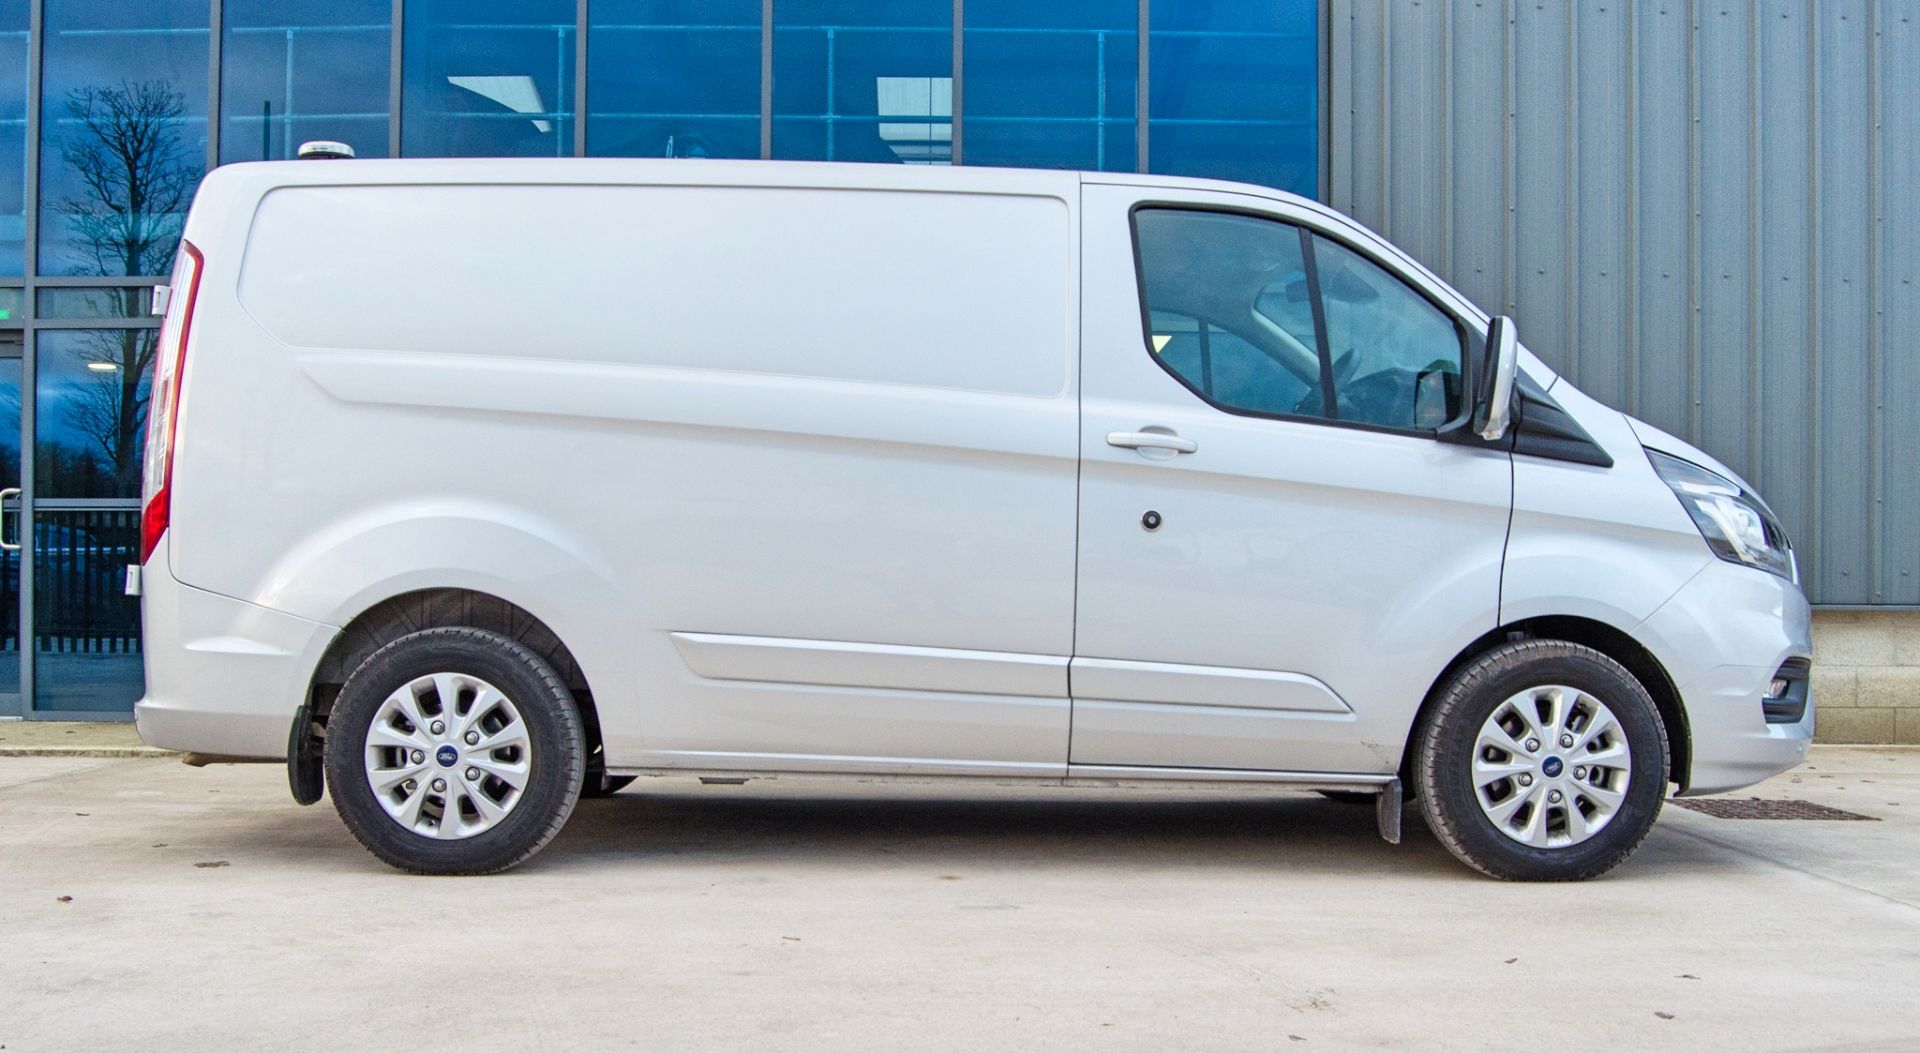 Ford Transit Custom 340 Trend L1 H1 Euro 6 plug in hybrid automatic window cleaning converted - Image 8 of 34